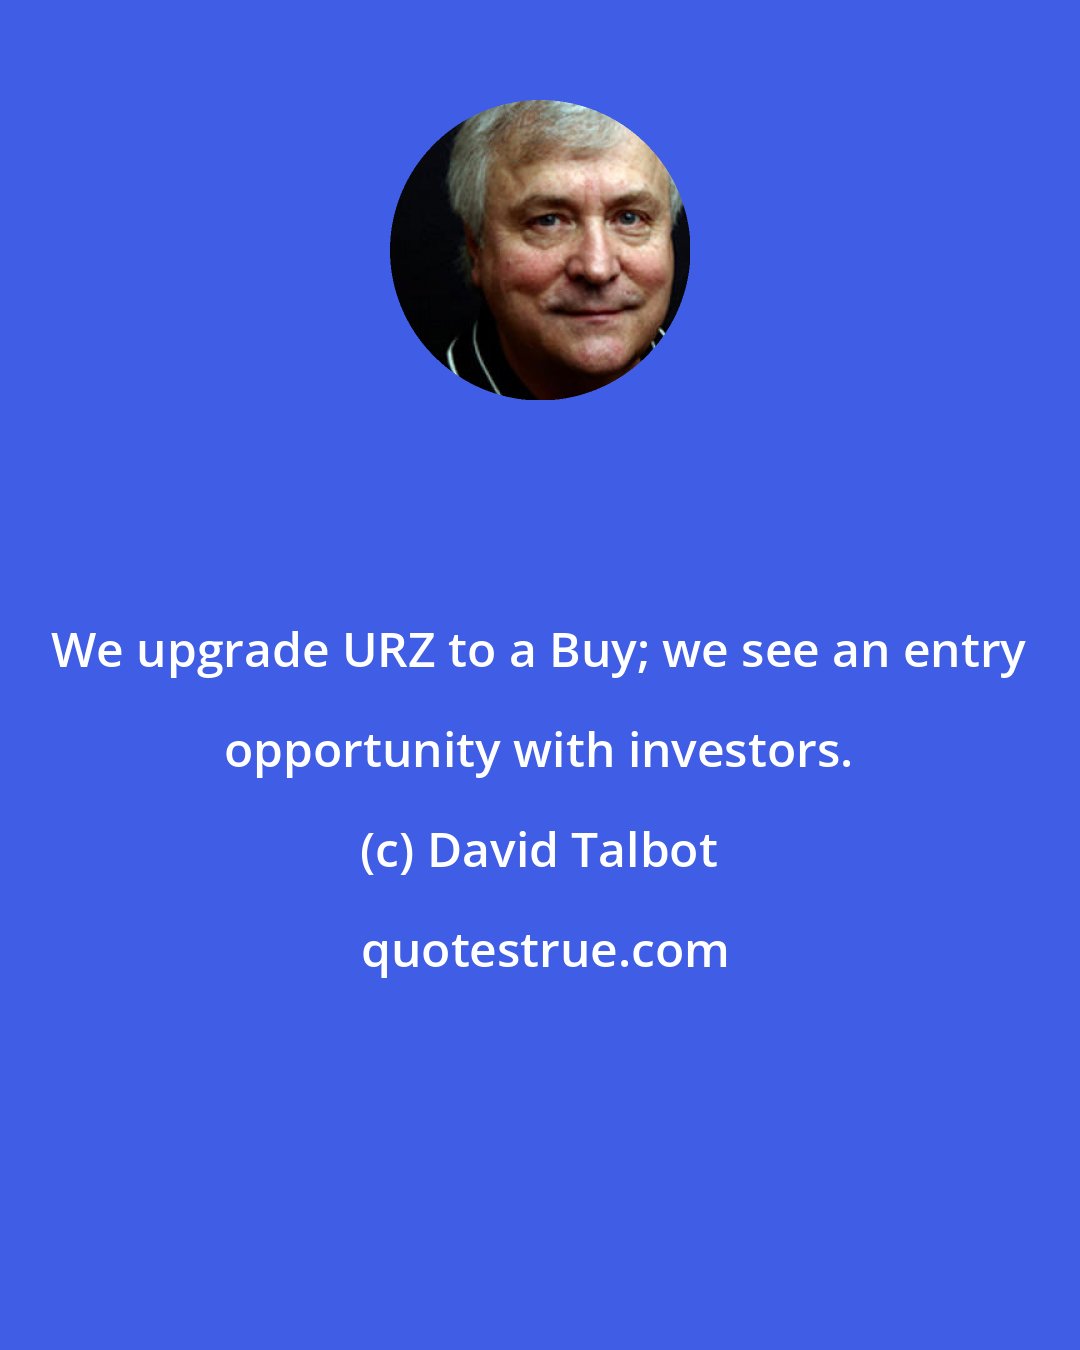 David Talbot: We upgrade URZ to a Buy; we see an entry opportunity with investors.